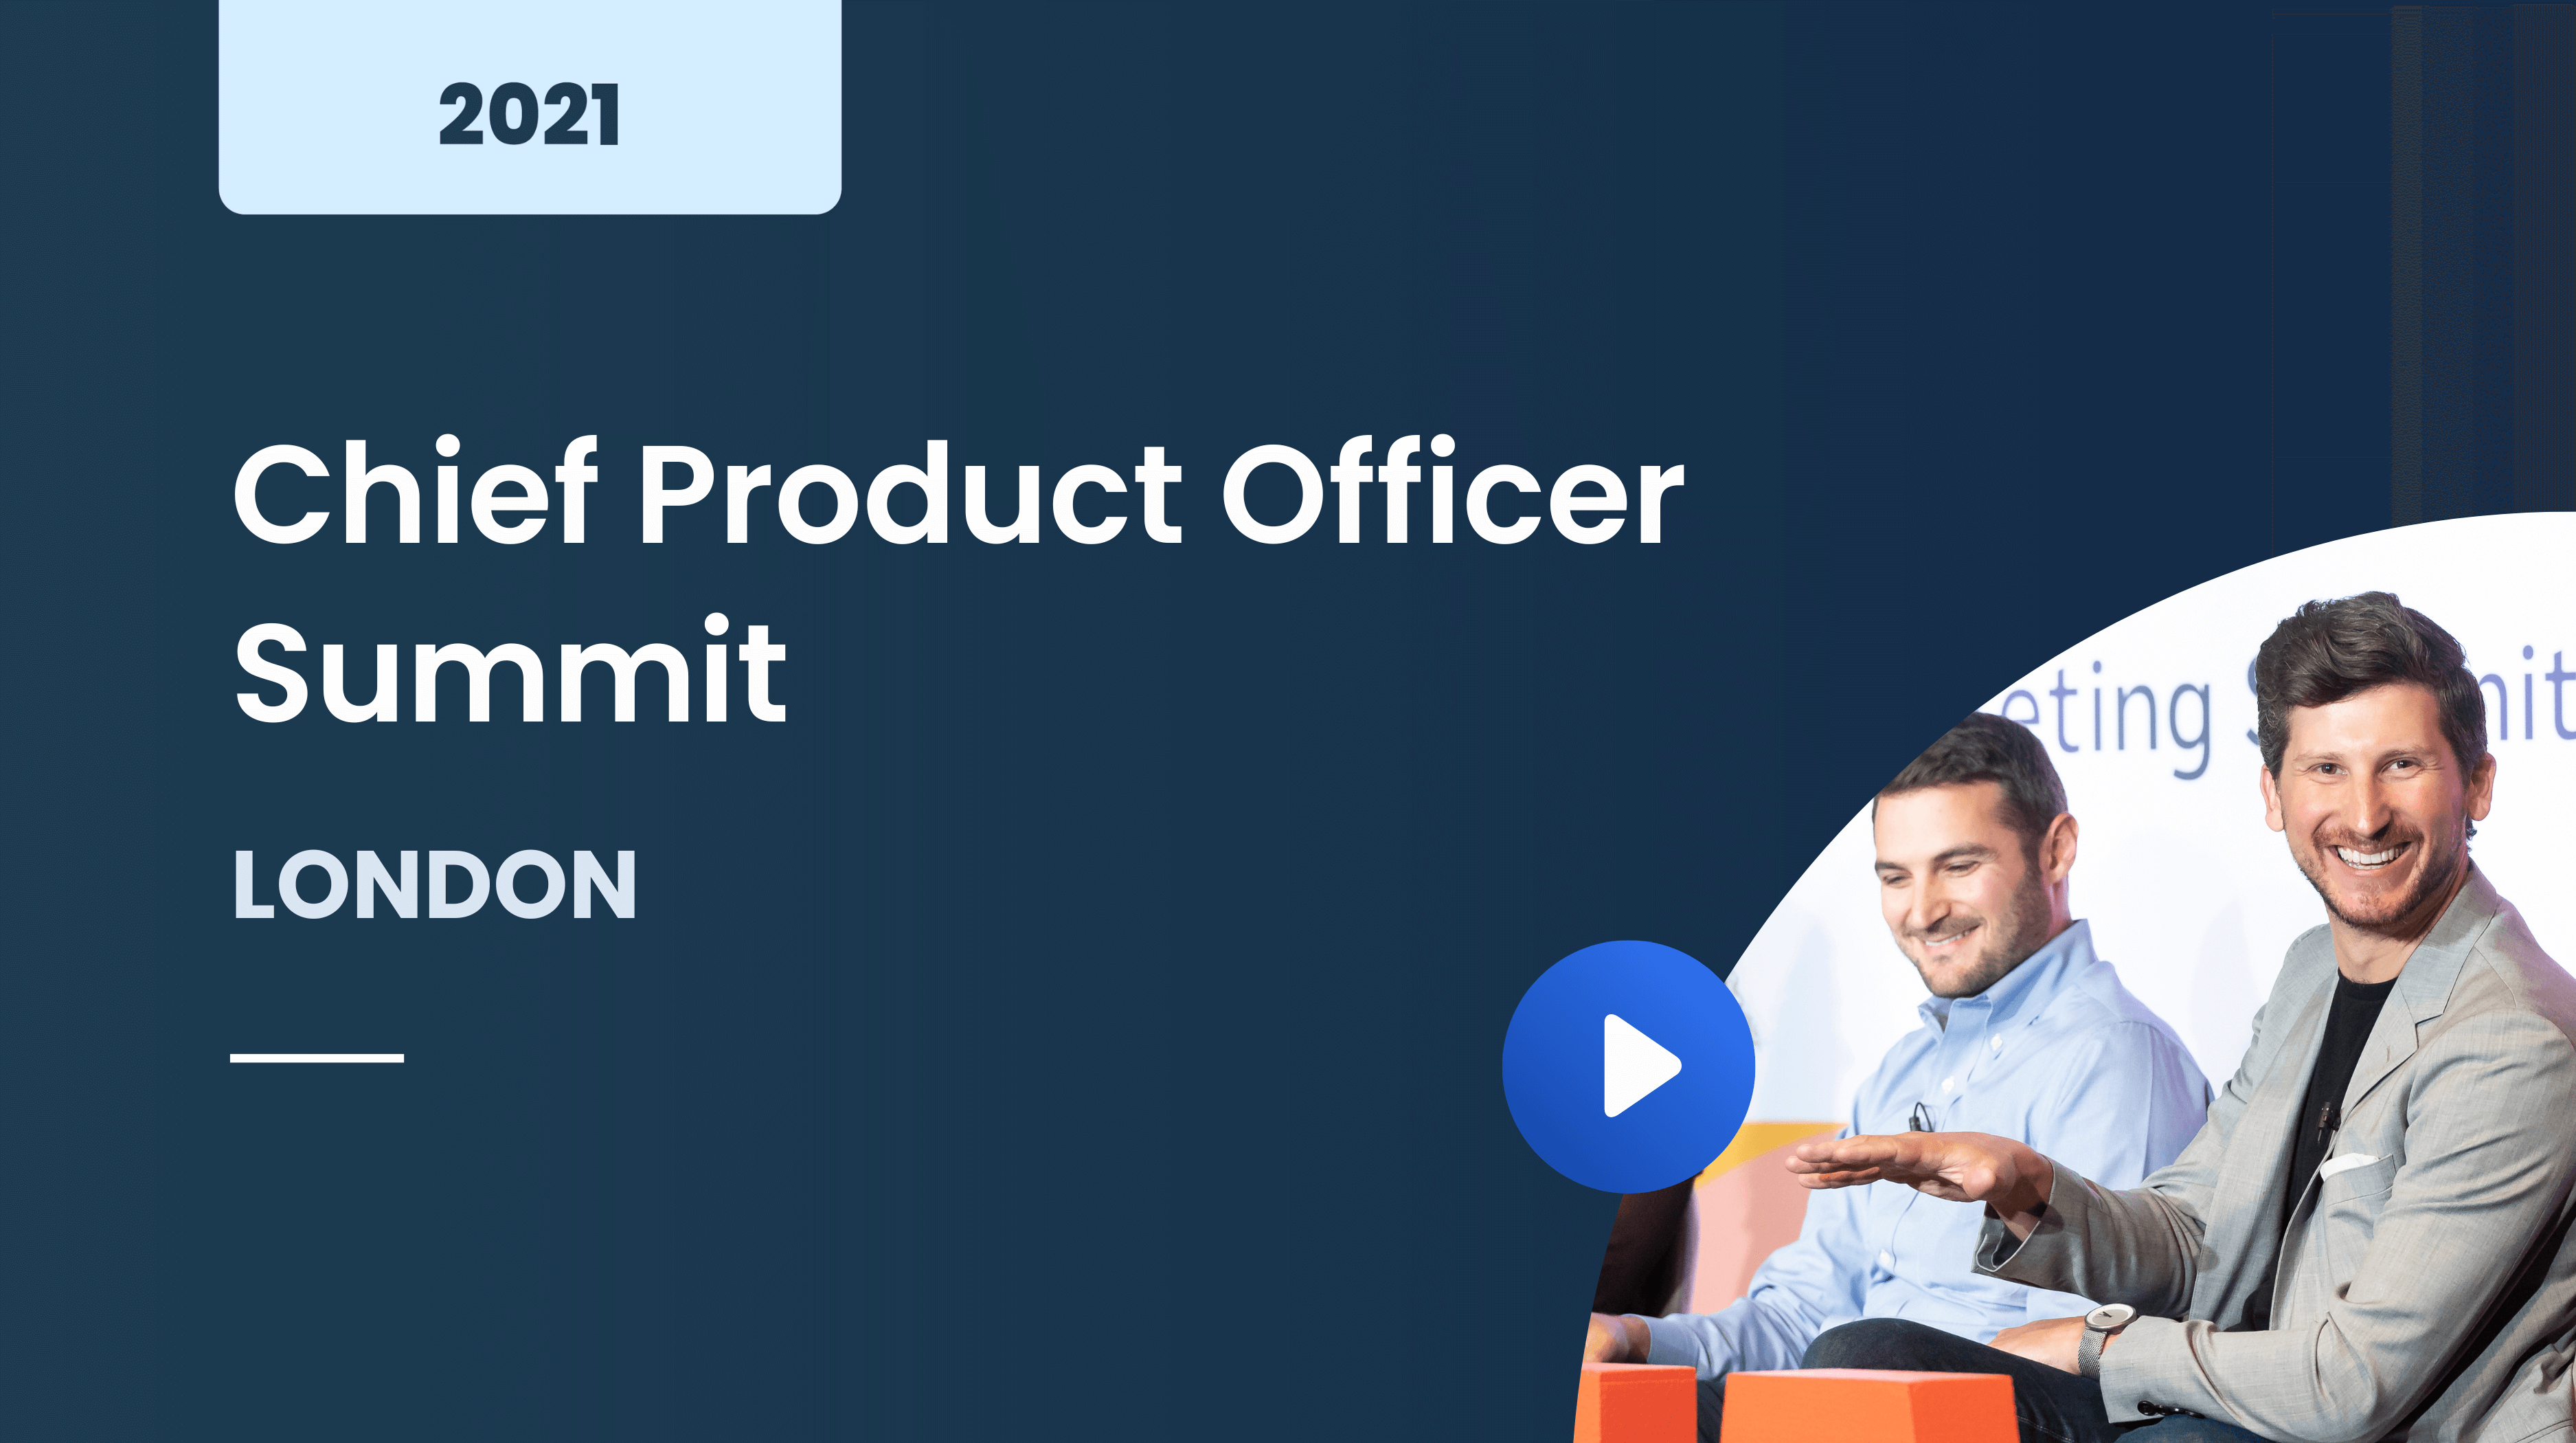 Chief Product Officer Summit London November 2021